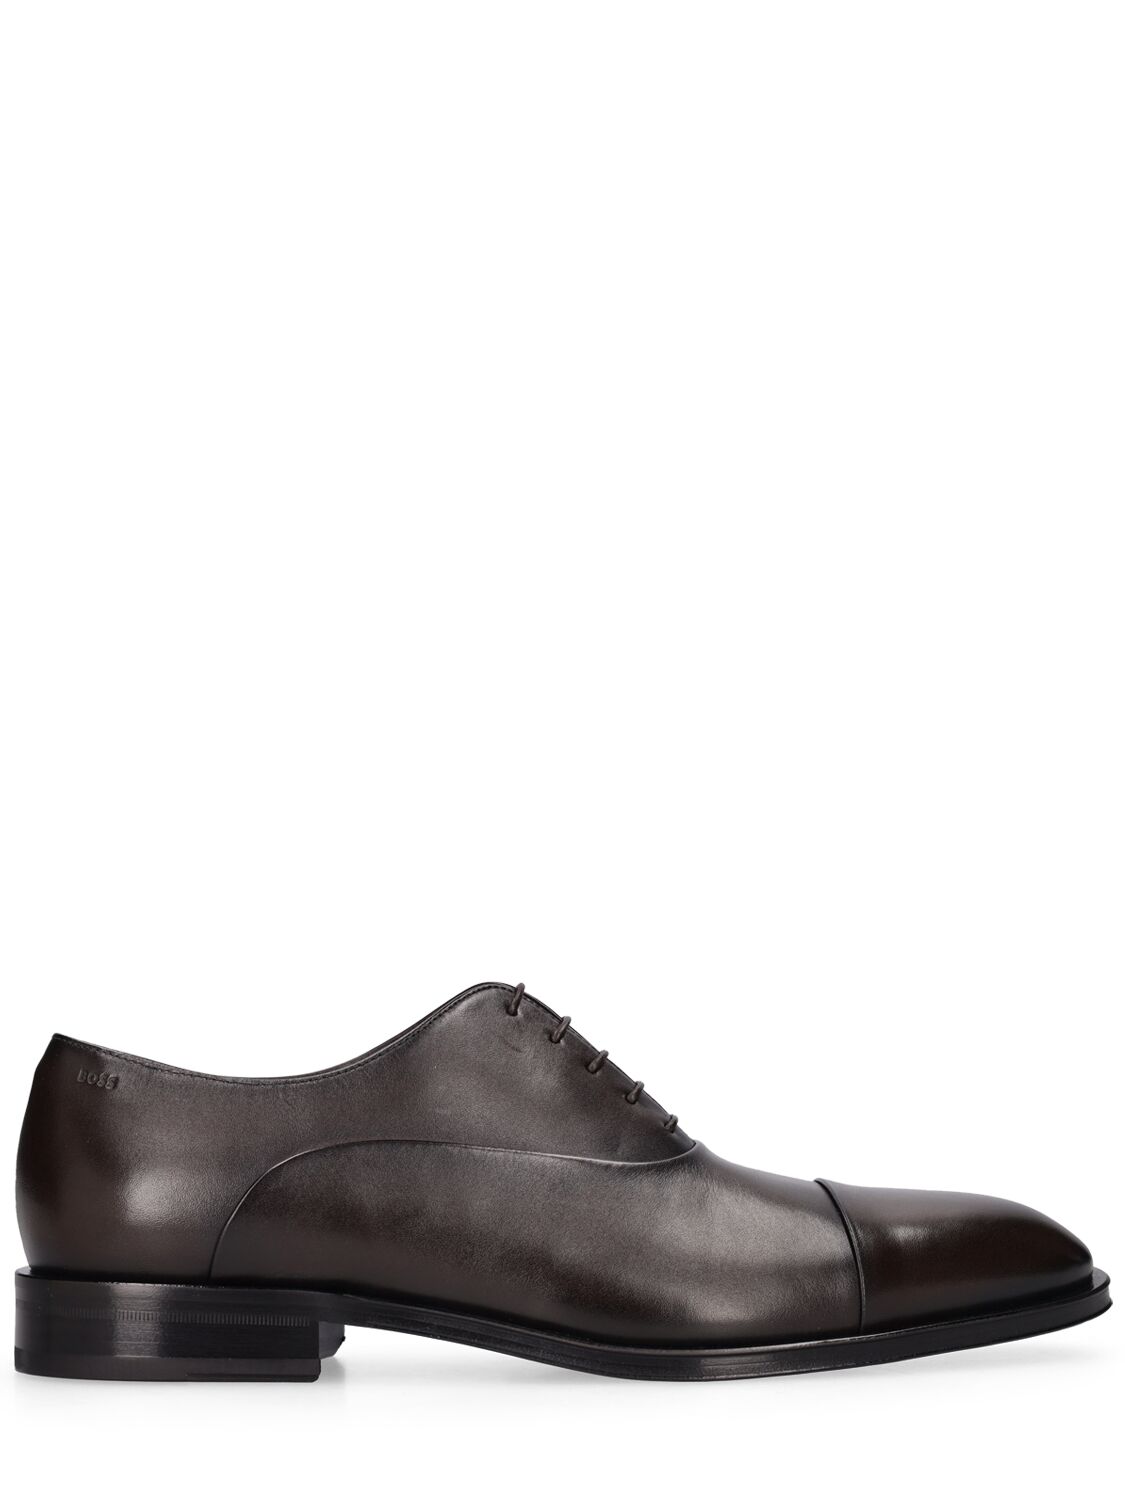 Hugo Boss Derrek Leather Oxford Lace-up Shoes In Dark Brown